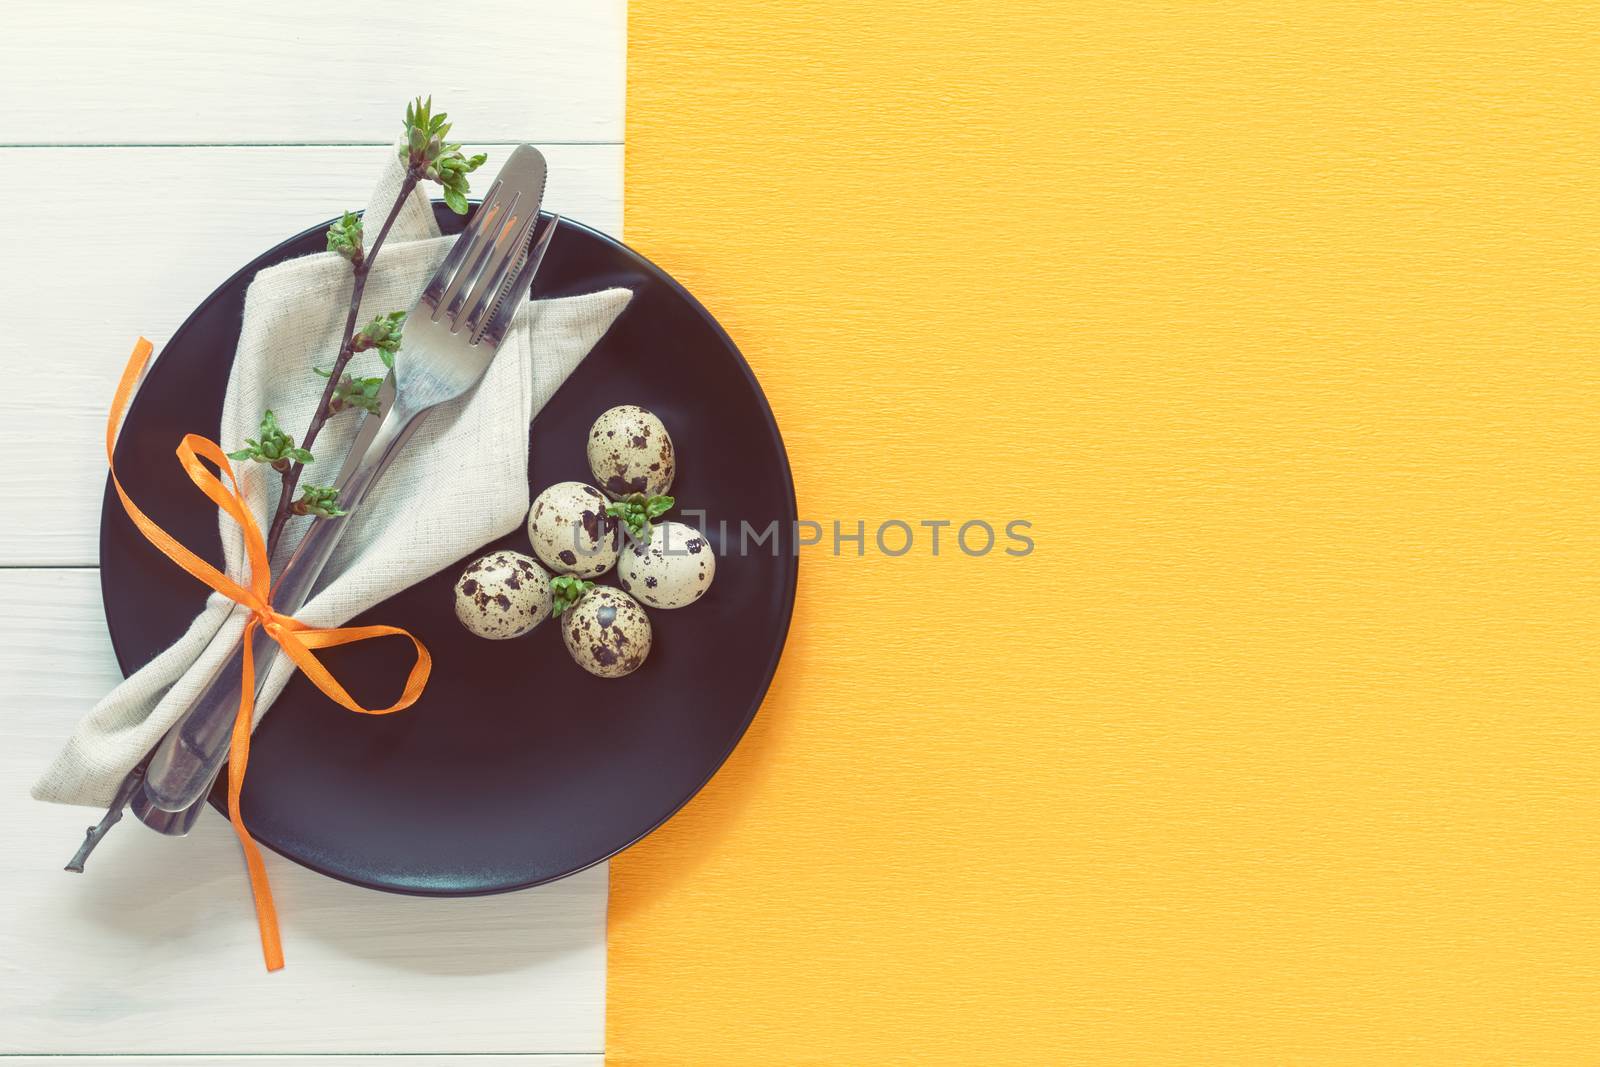 Easter table setting with spring flowers and cutlery. Rustic orange table cloth on white wood background. Holidays background with copy space.